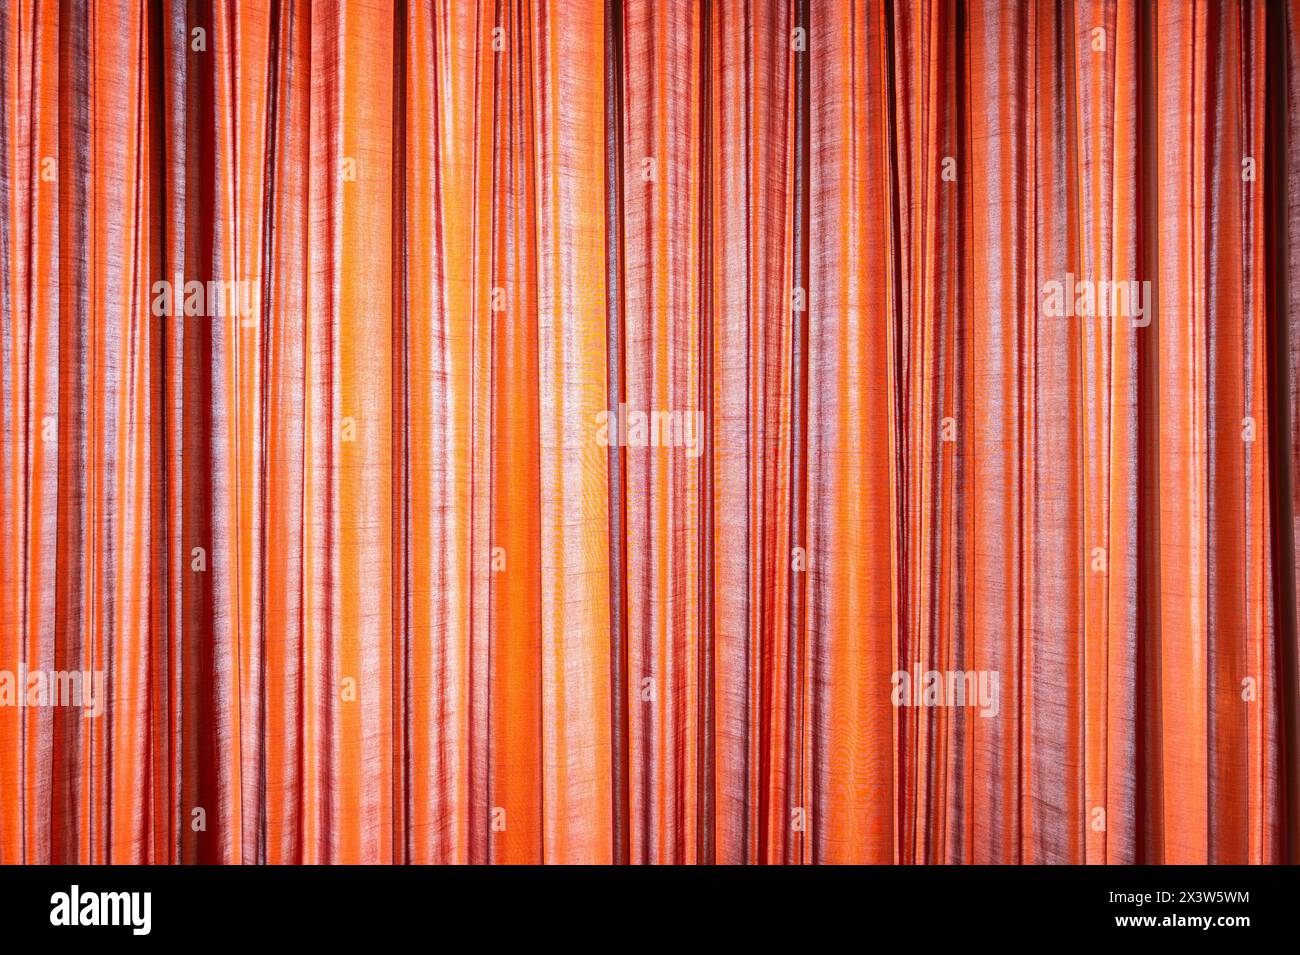 Background of orange stripped curtain covering window with bright sunlight outside. Stock Photo